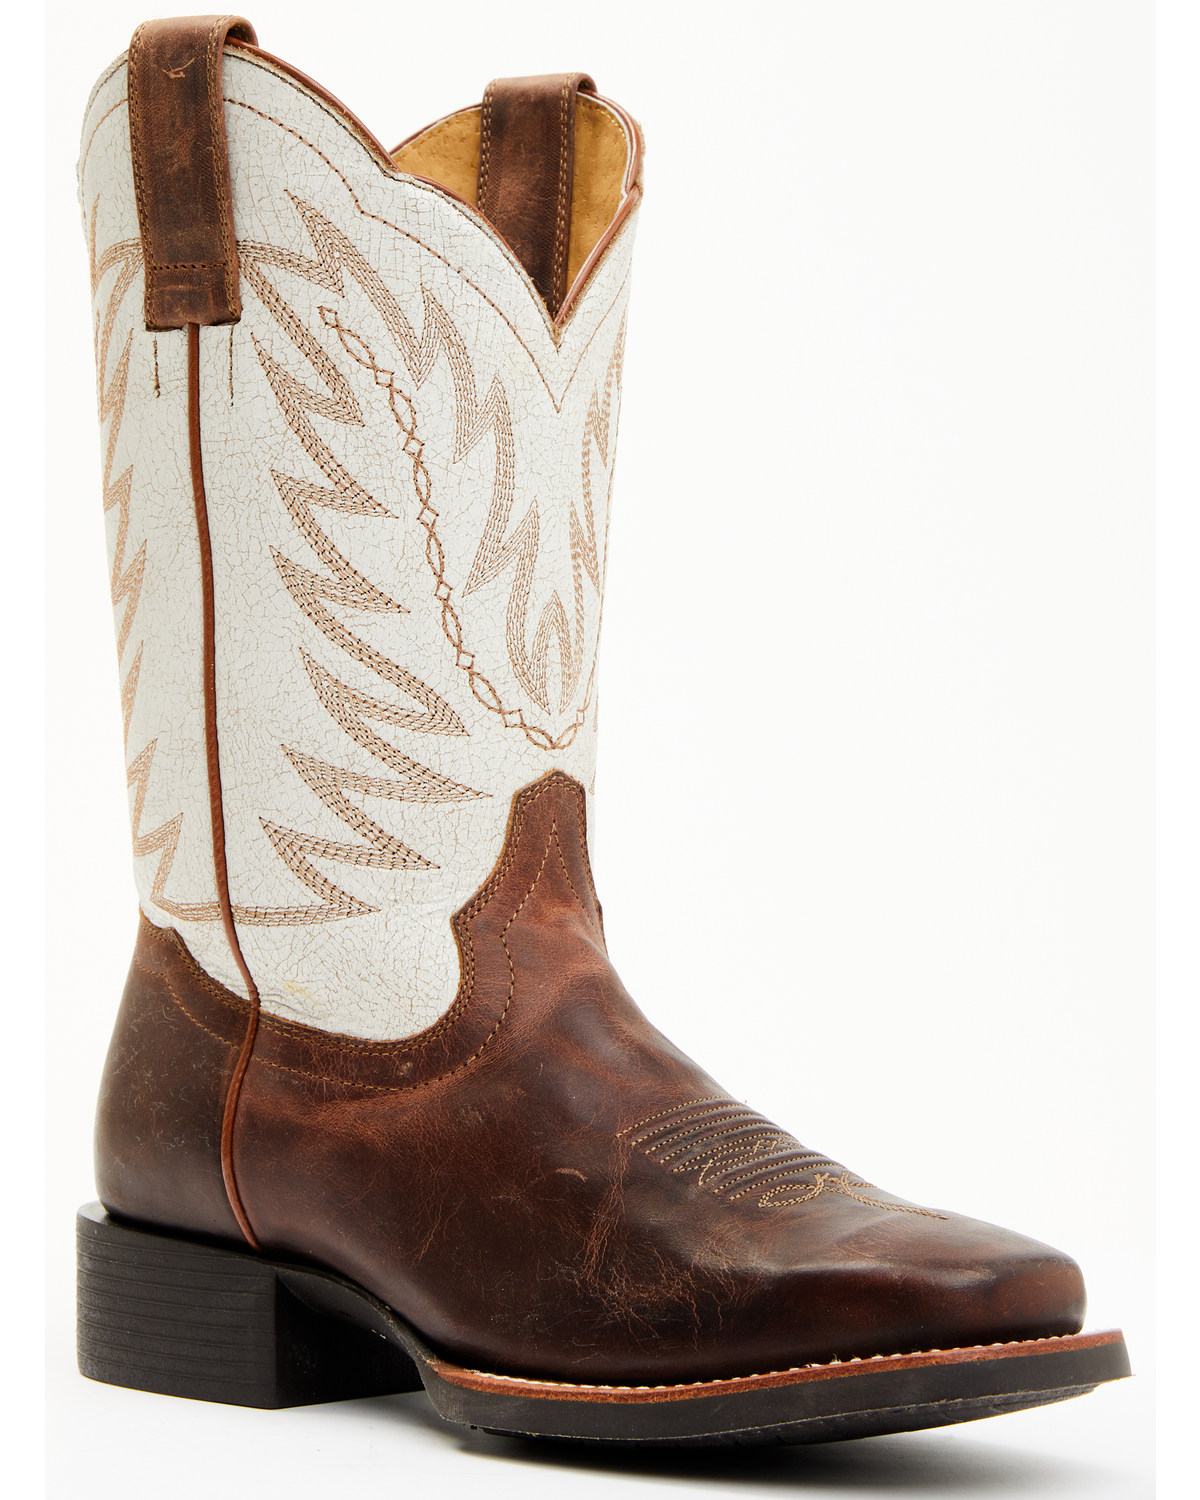 Shyanne Stryde® Women's Western Performance Boots - Broad Square Toe